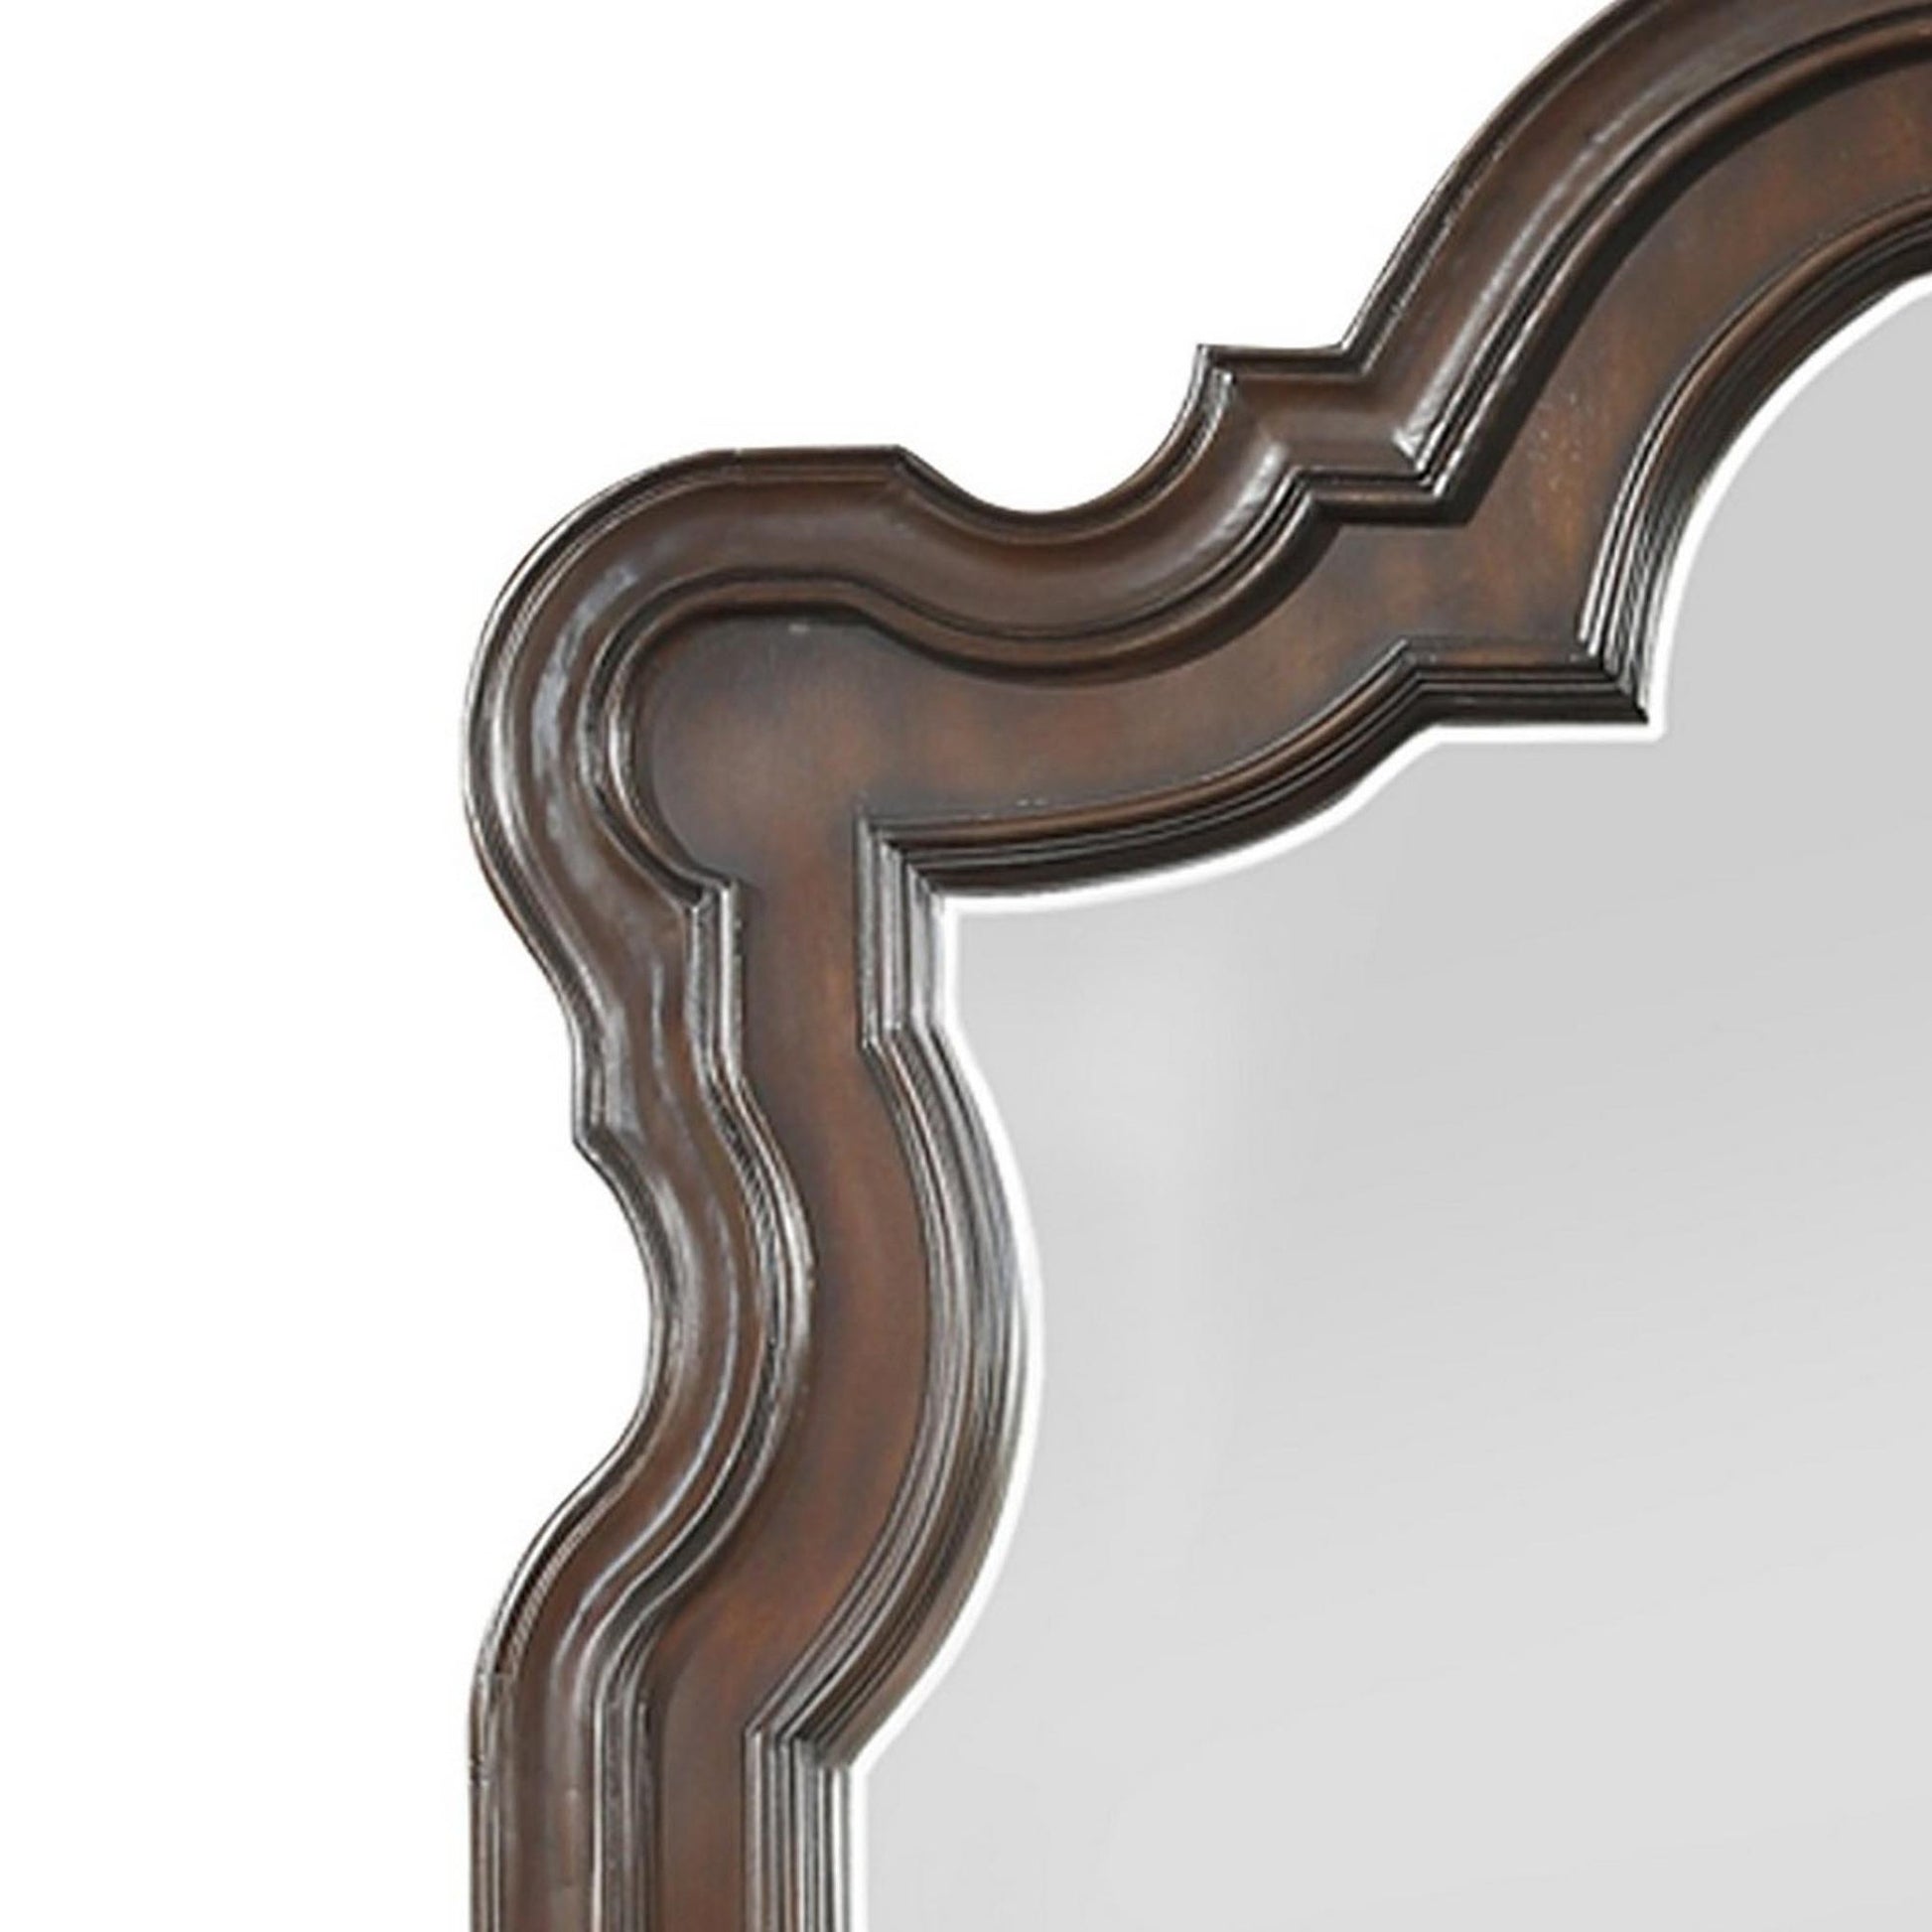 Benzara Brown and Silver Scalloped Design Wooden Frame Mirror With Molded Details